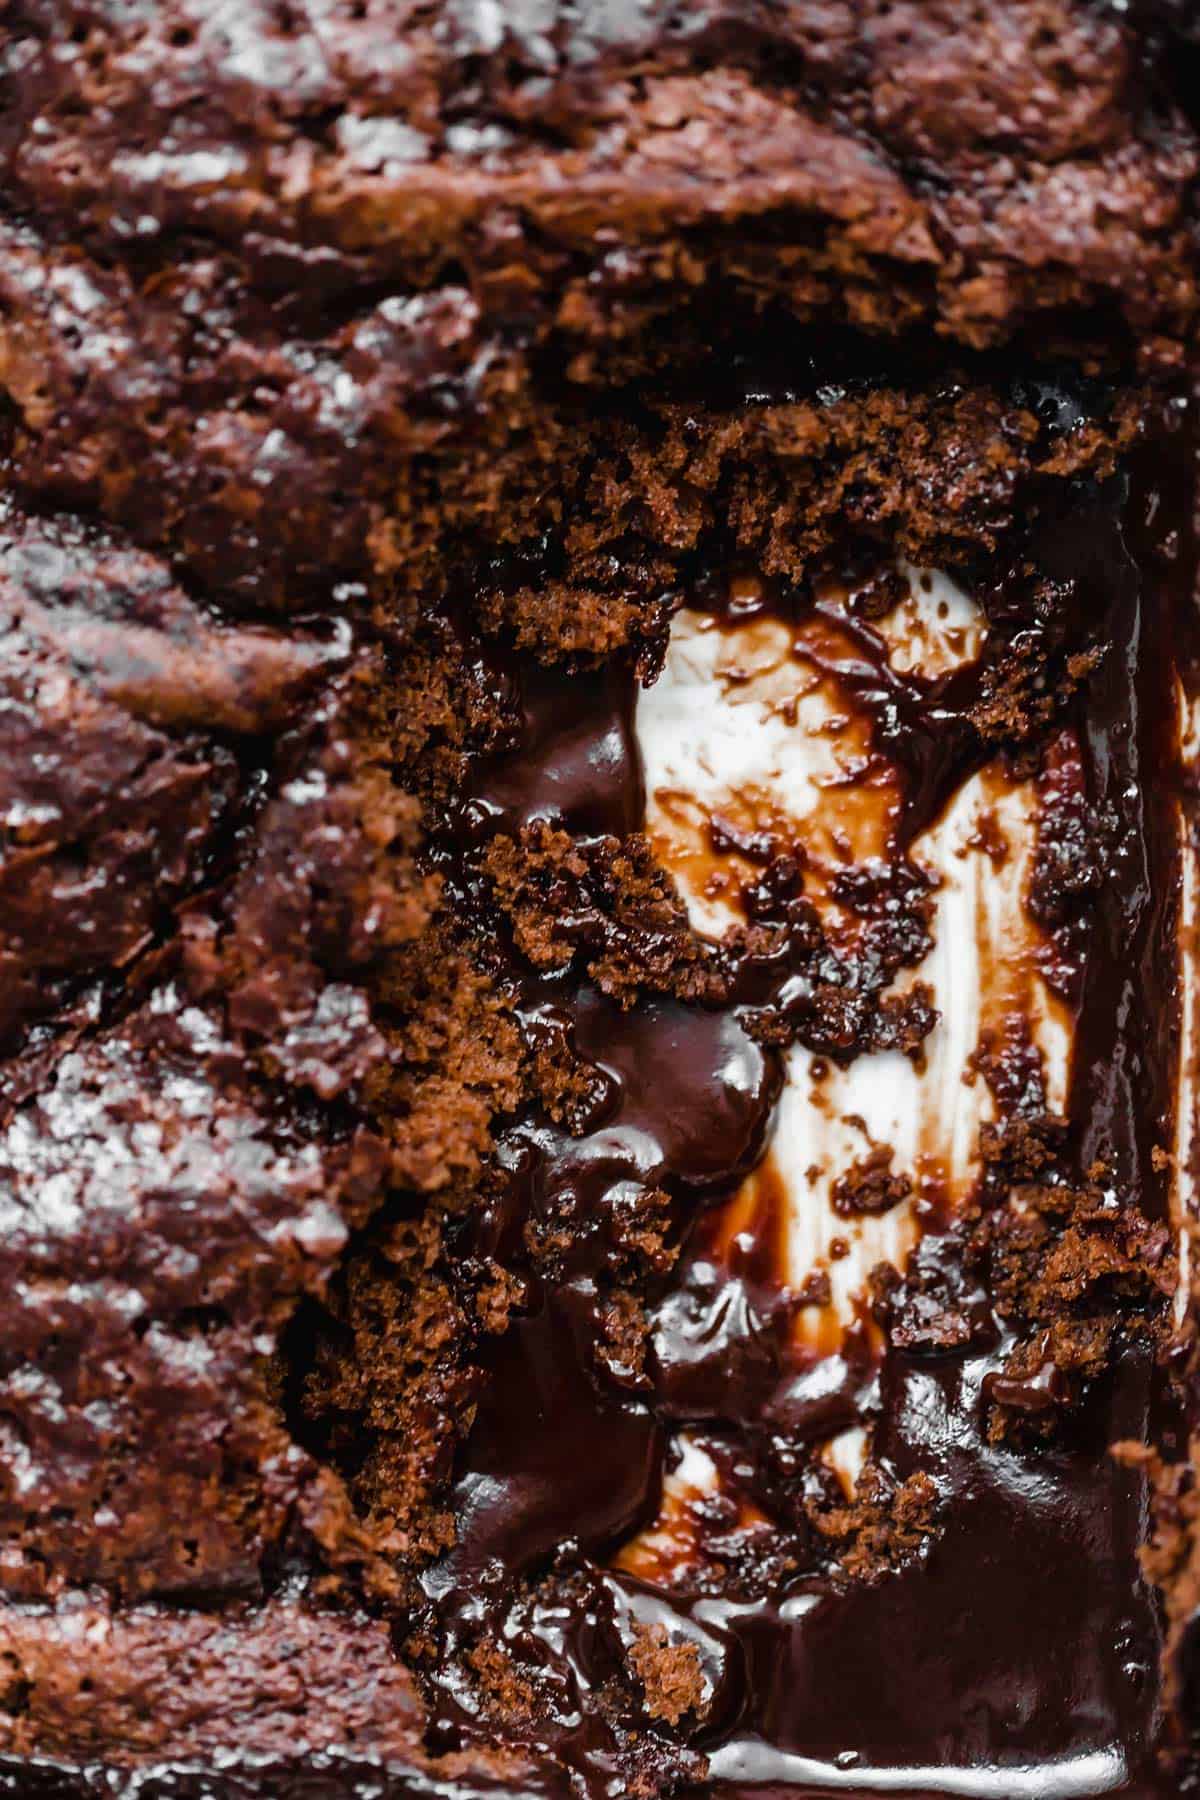 A close up photo of hot fudge cake removed from a baking dish, leaving behind the cake crumbs and hot fudge.